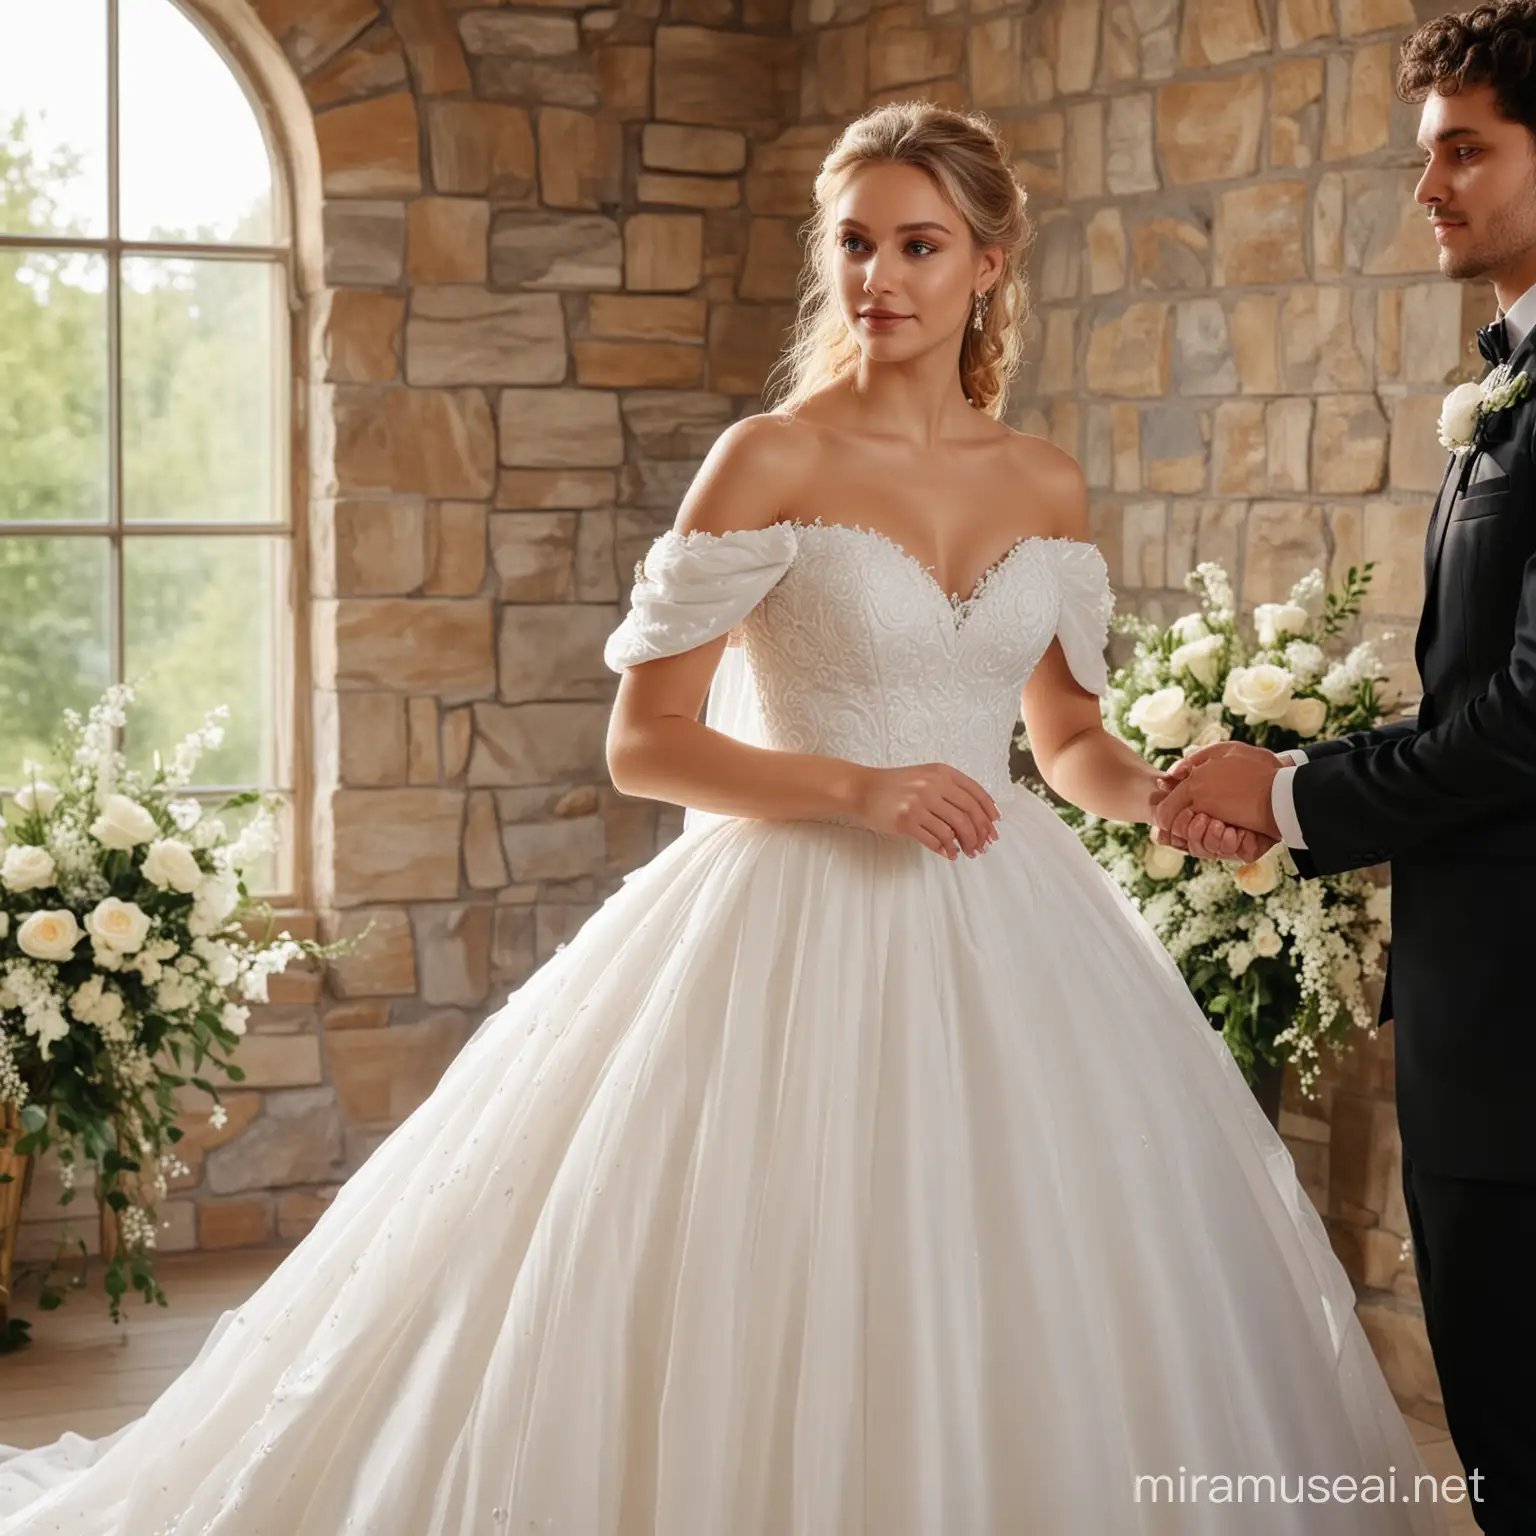 Beautiful blonde girl in a beautiful white puffy off-the-shoulder wedding dress stands at the altar with a guy with dark curly hair in a tuxedo, nature, wedding, close-up